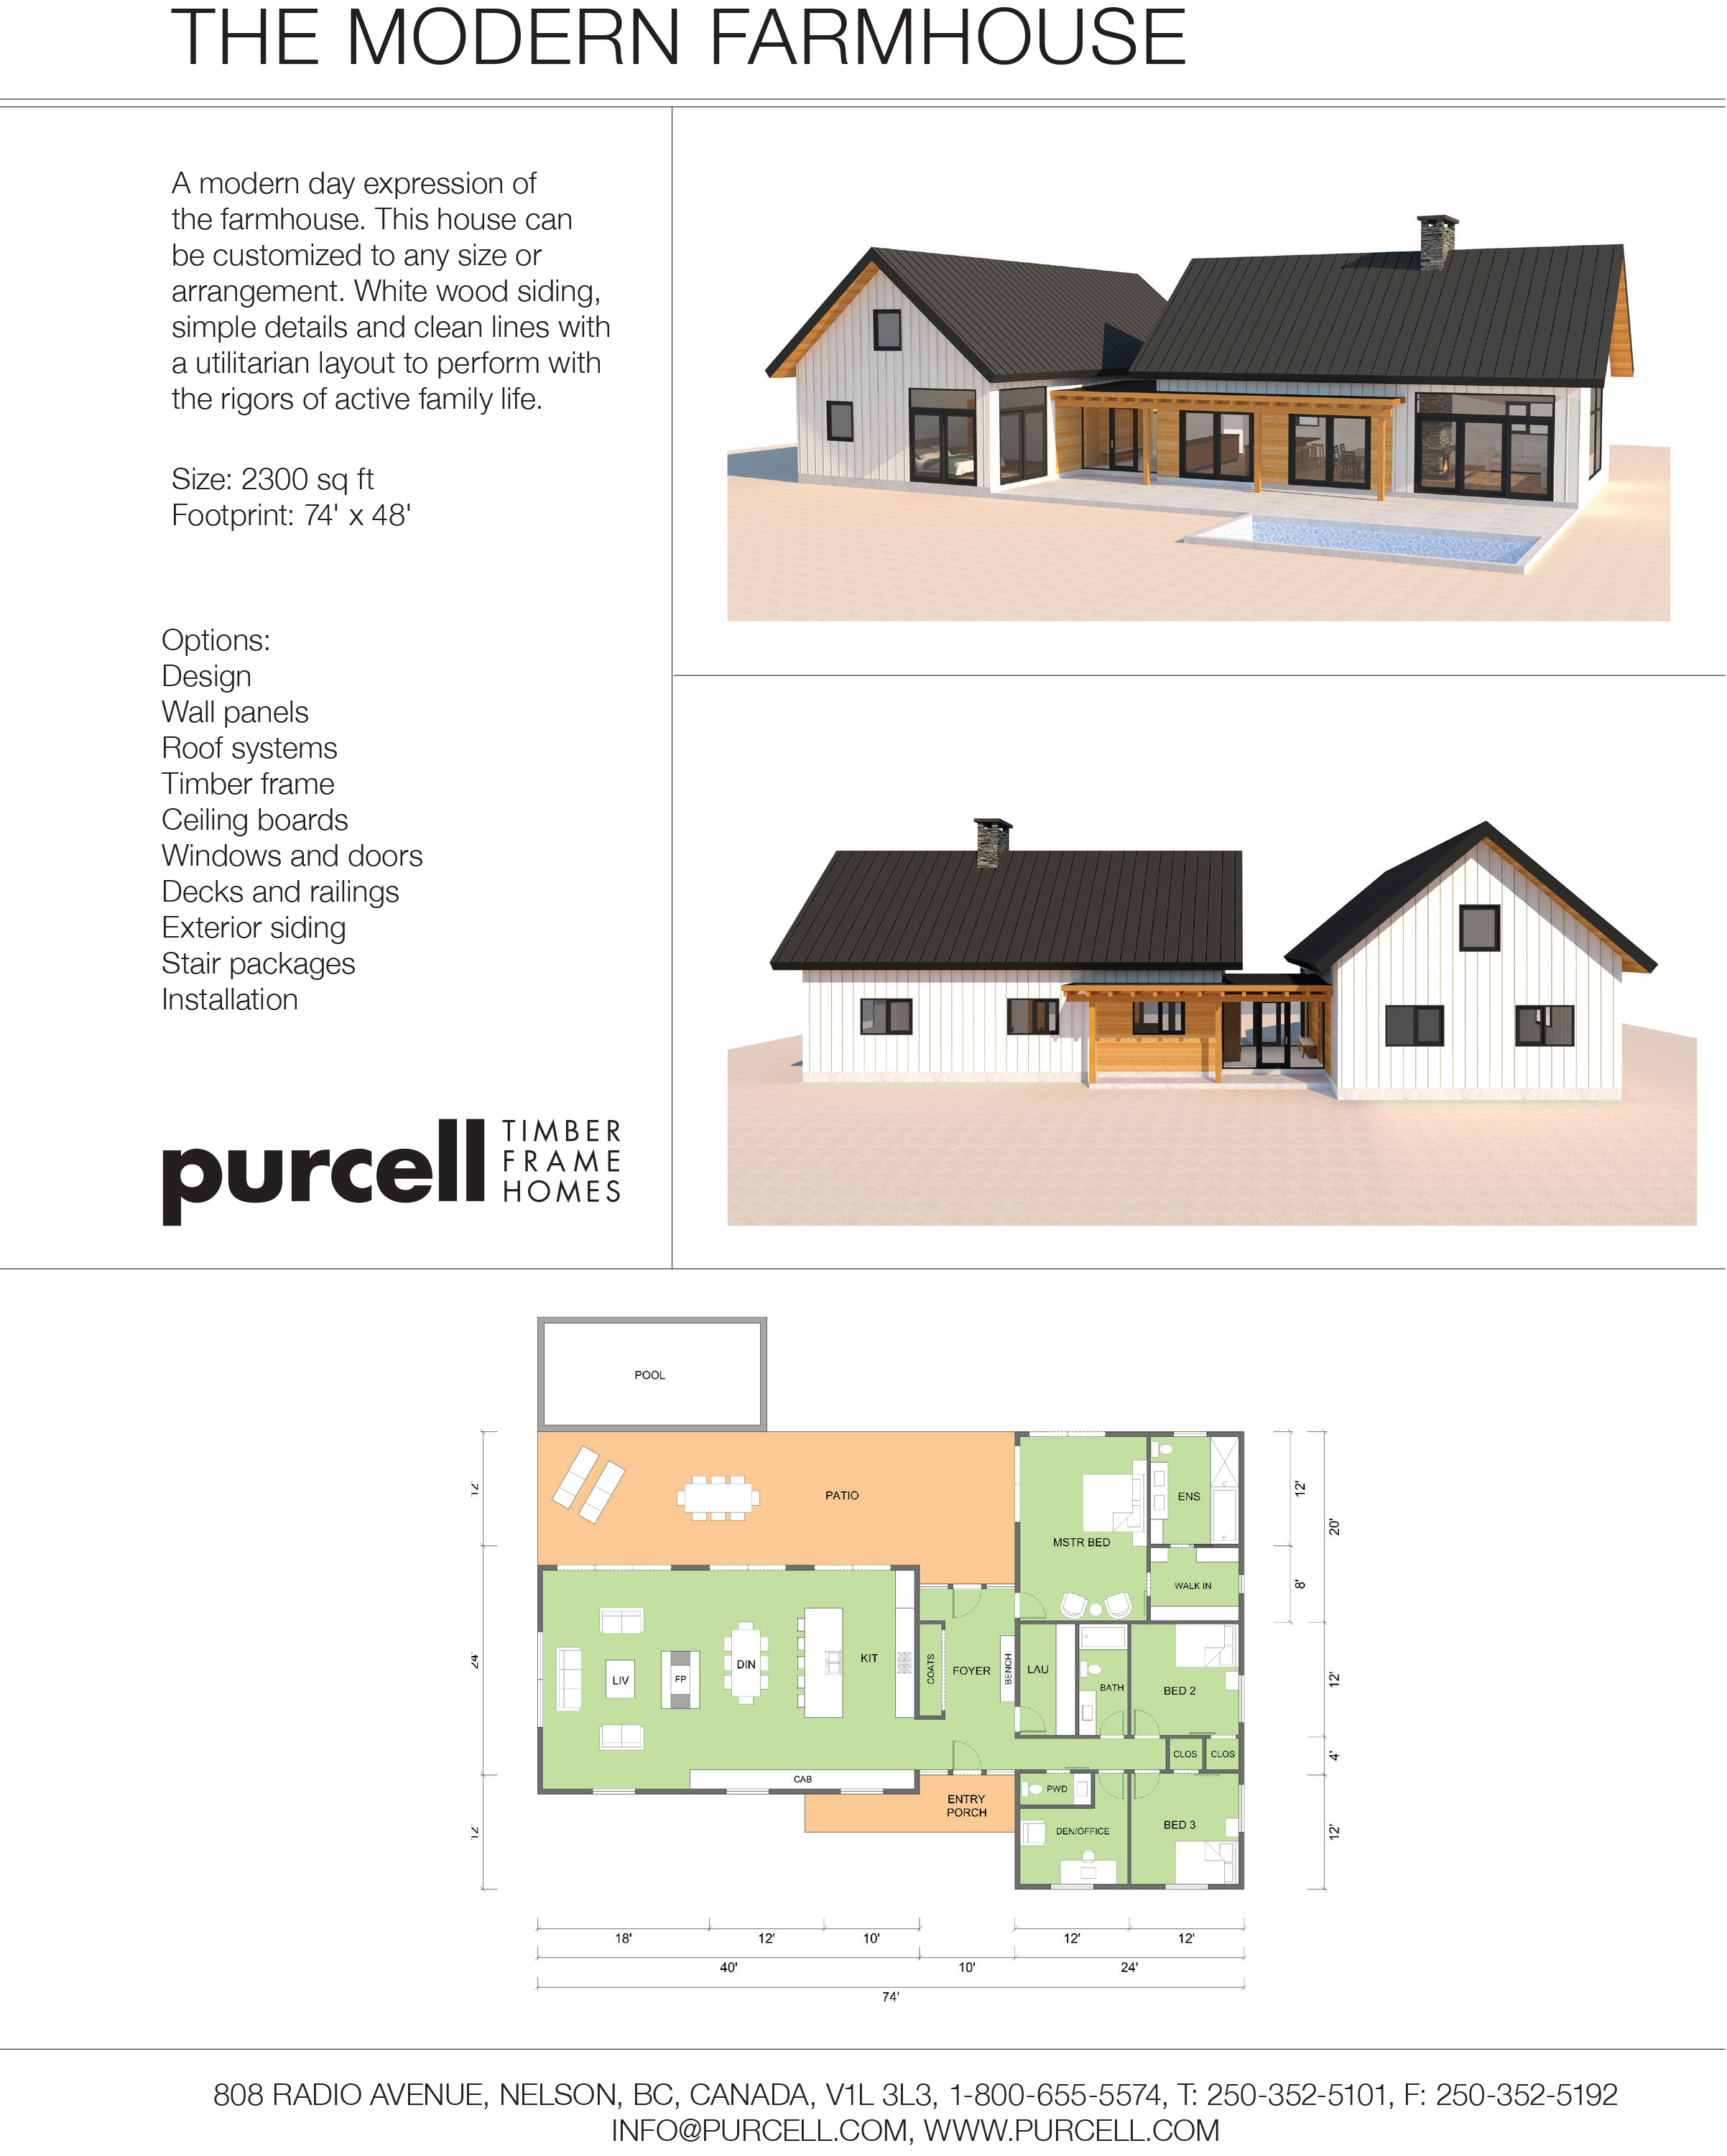 The Modern Farmhouse Design and Floor Plans by Purcell